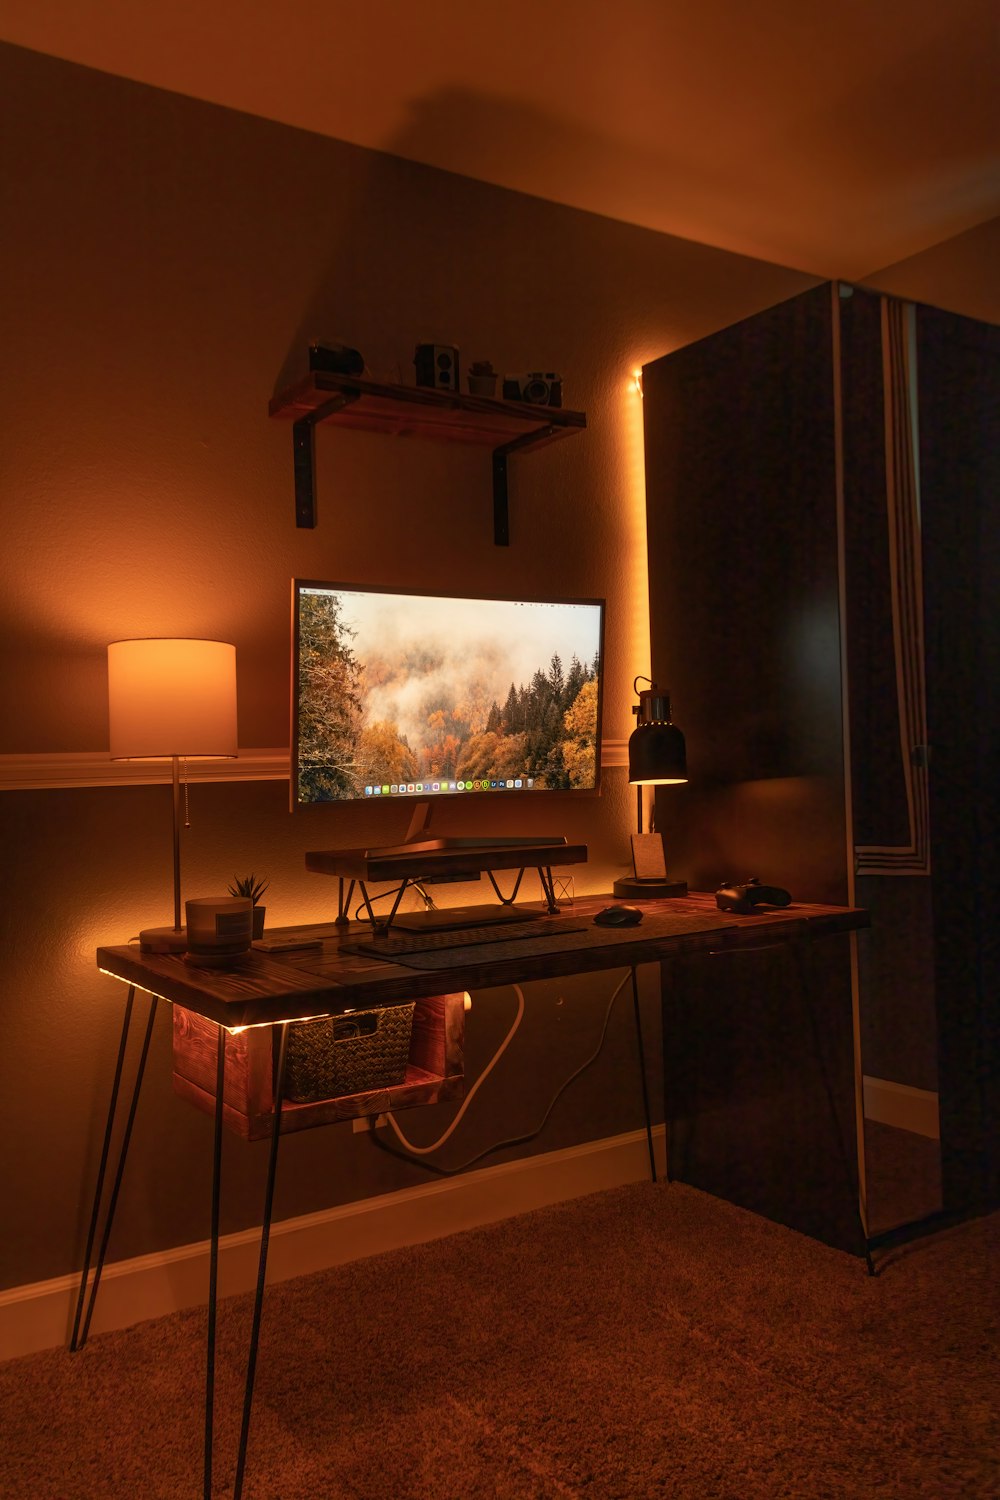 black flat screen computer monitor on brown wooden desk